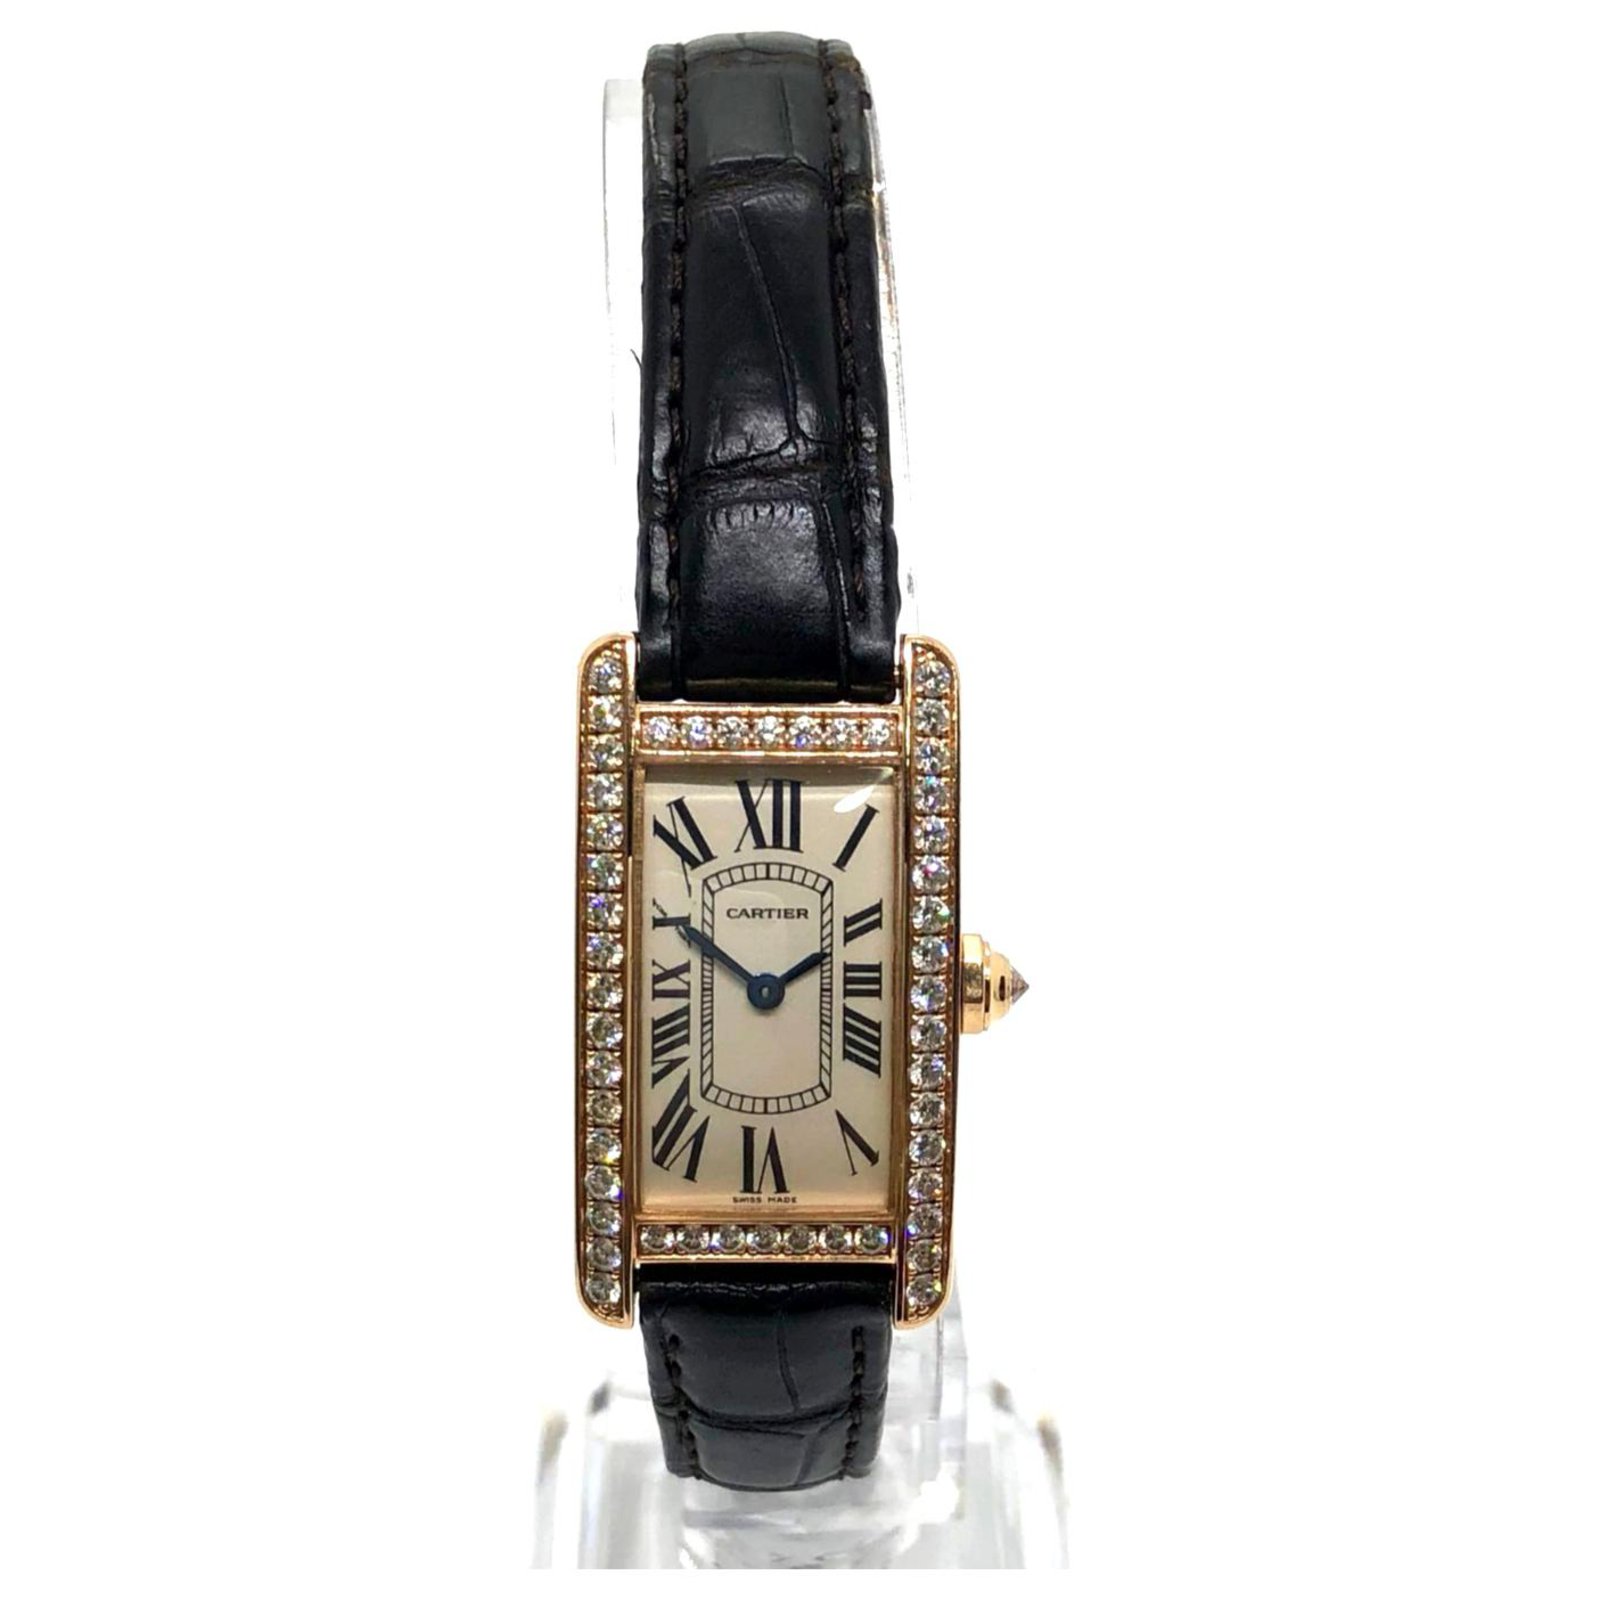 cartier rose gold tank americaine